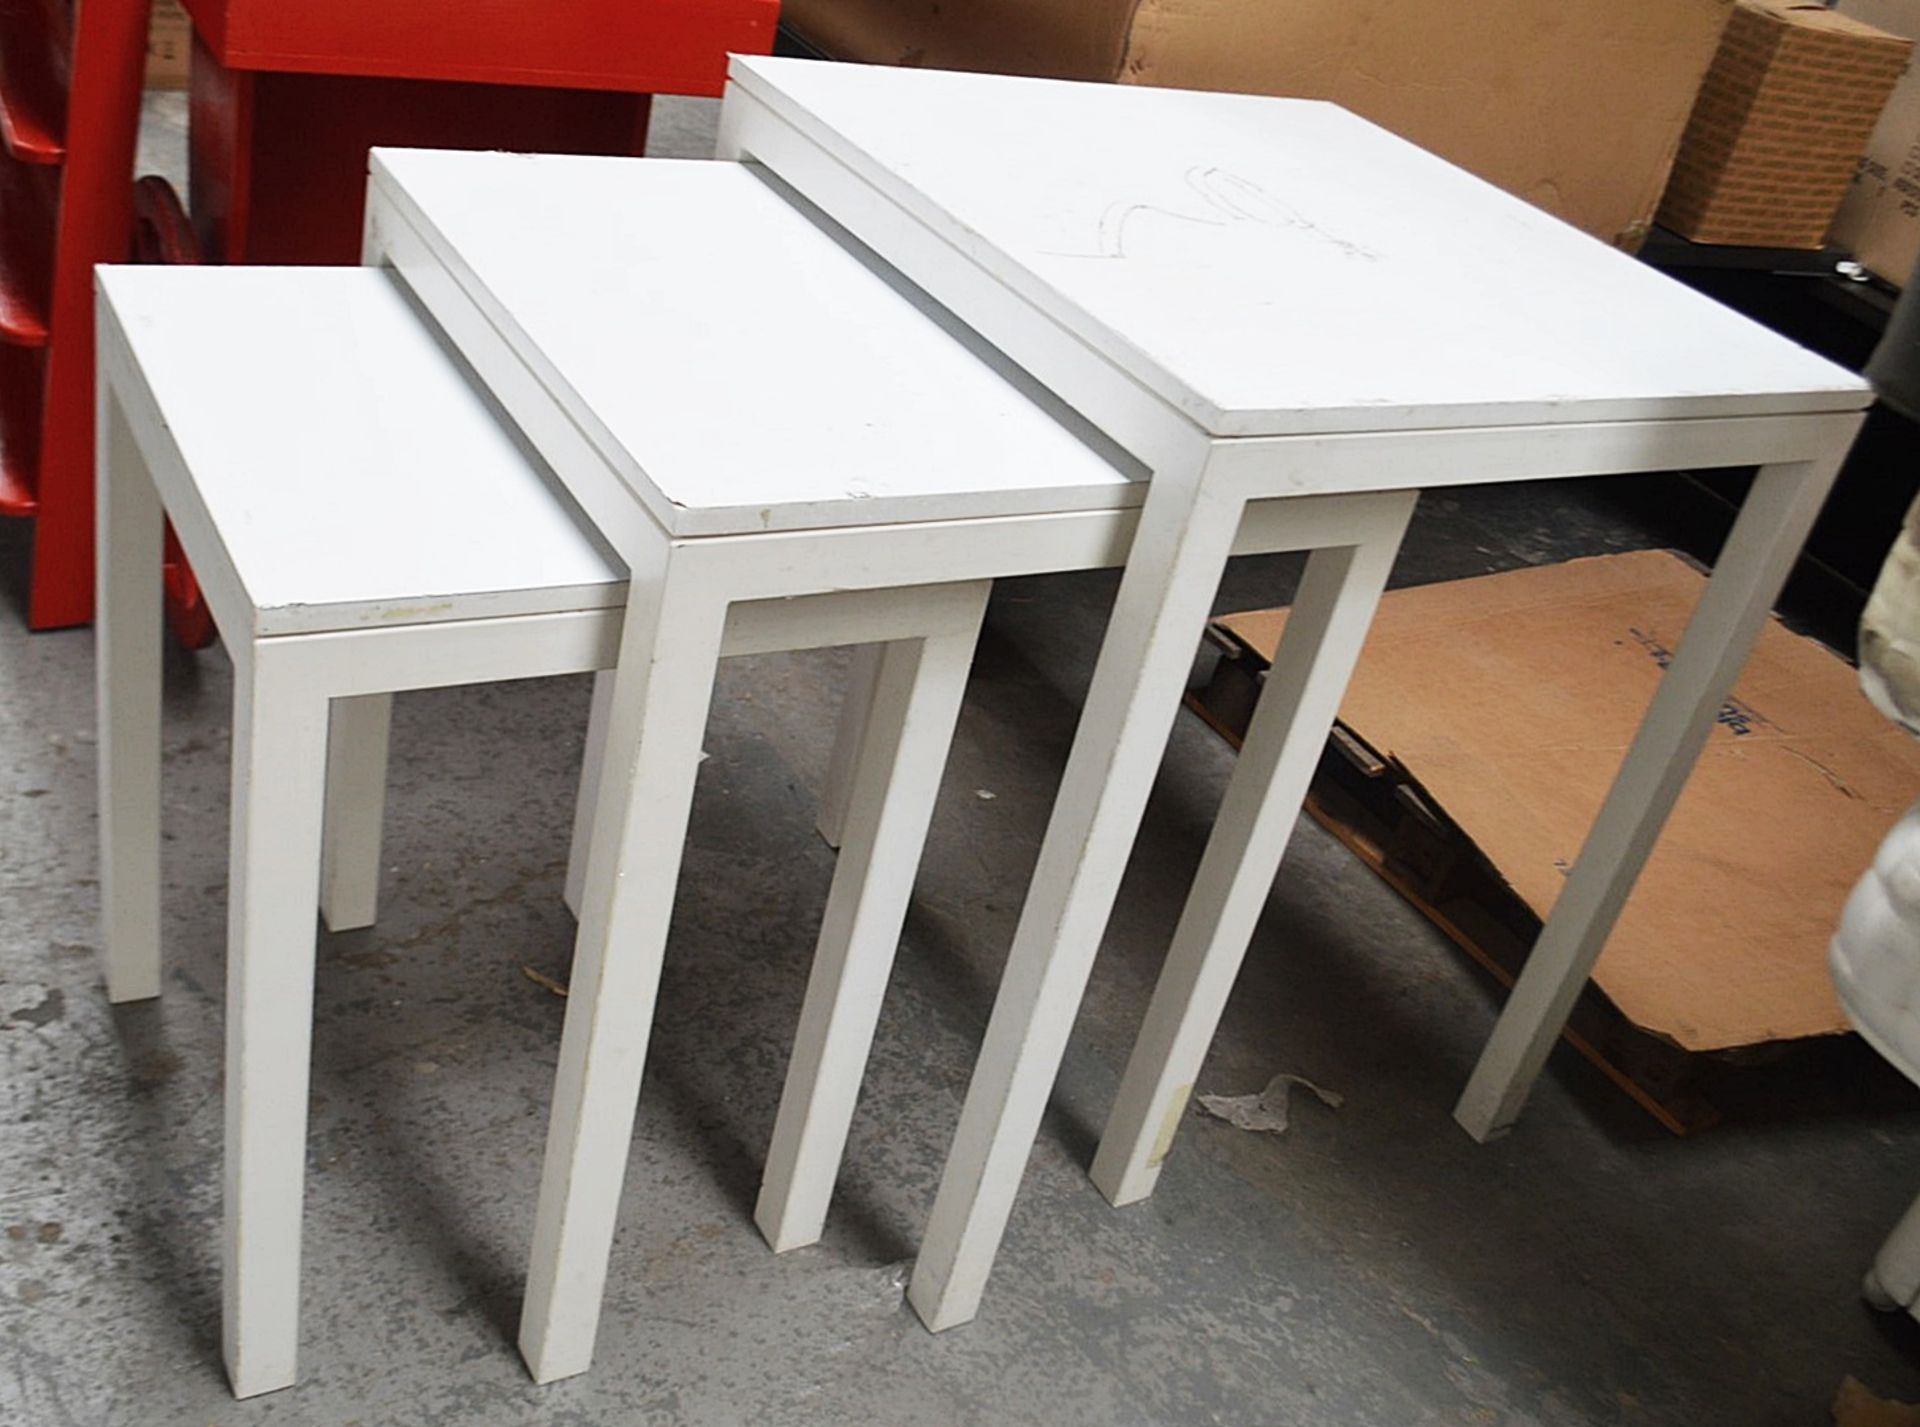 A Set Of 3 x Commercial Nesting Display Tables In White With Sturdy Metal Frames - Ex-Display - Image 2 of 3